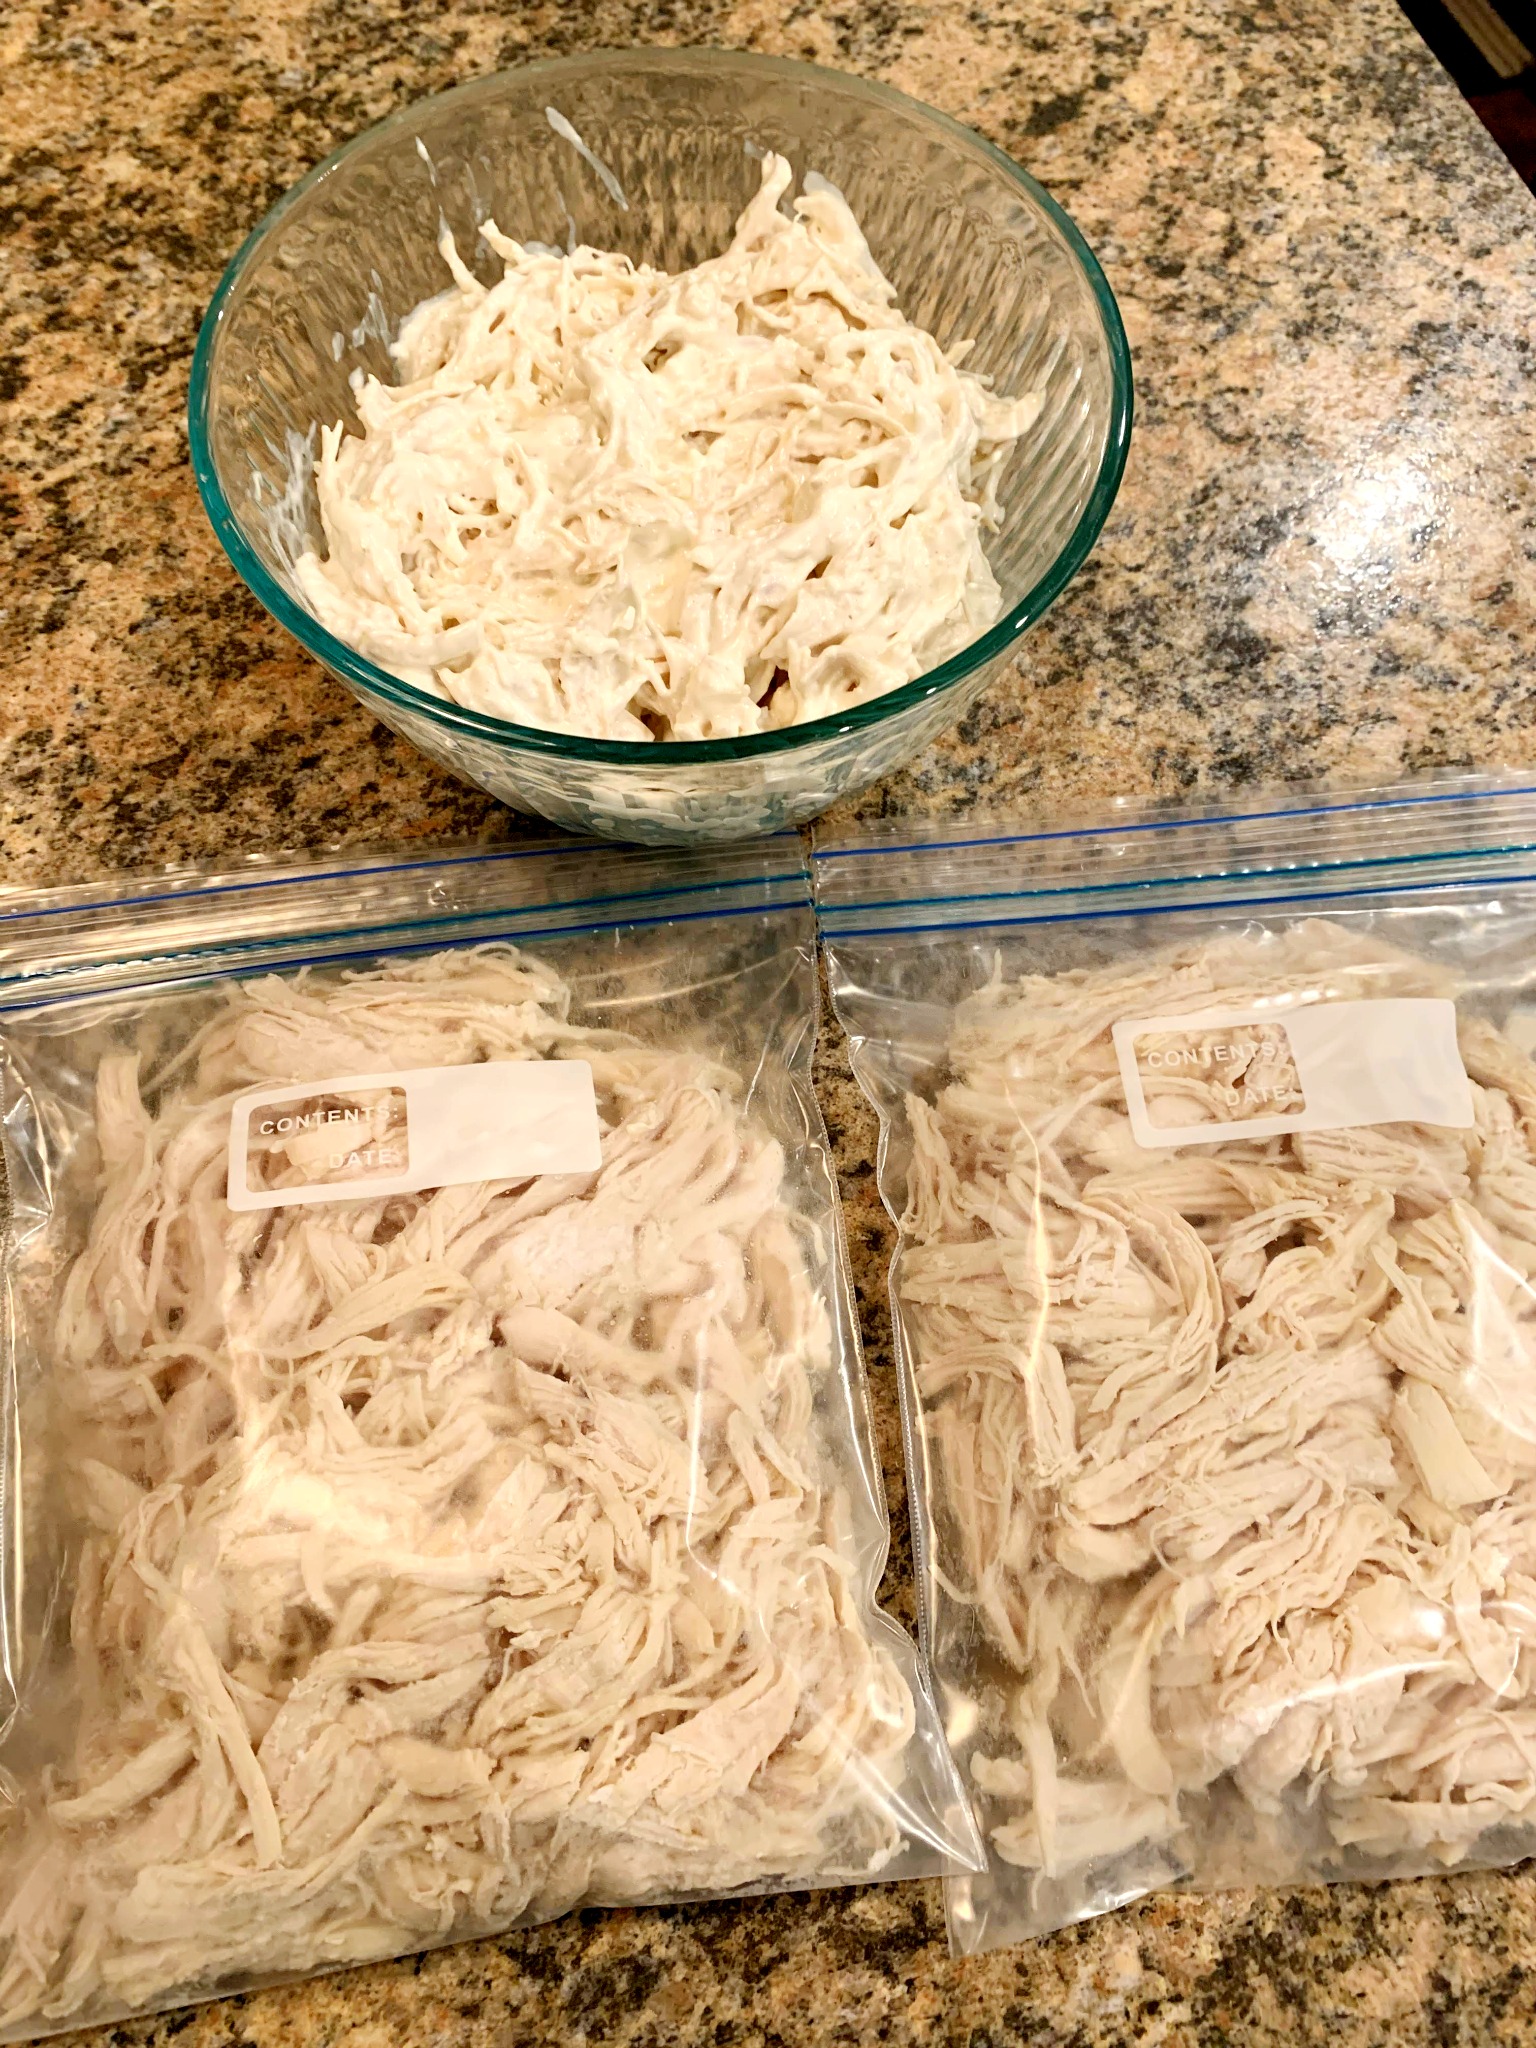 a glass bowl of shredded chicken and two freezer bags in front of it filled with shredded chicken